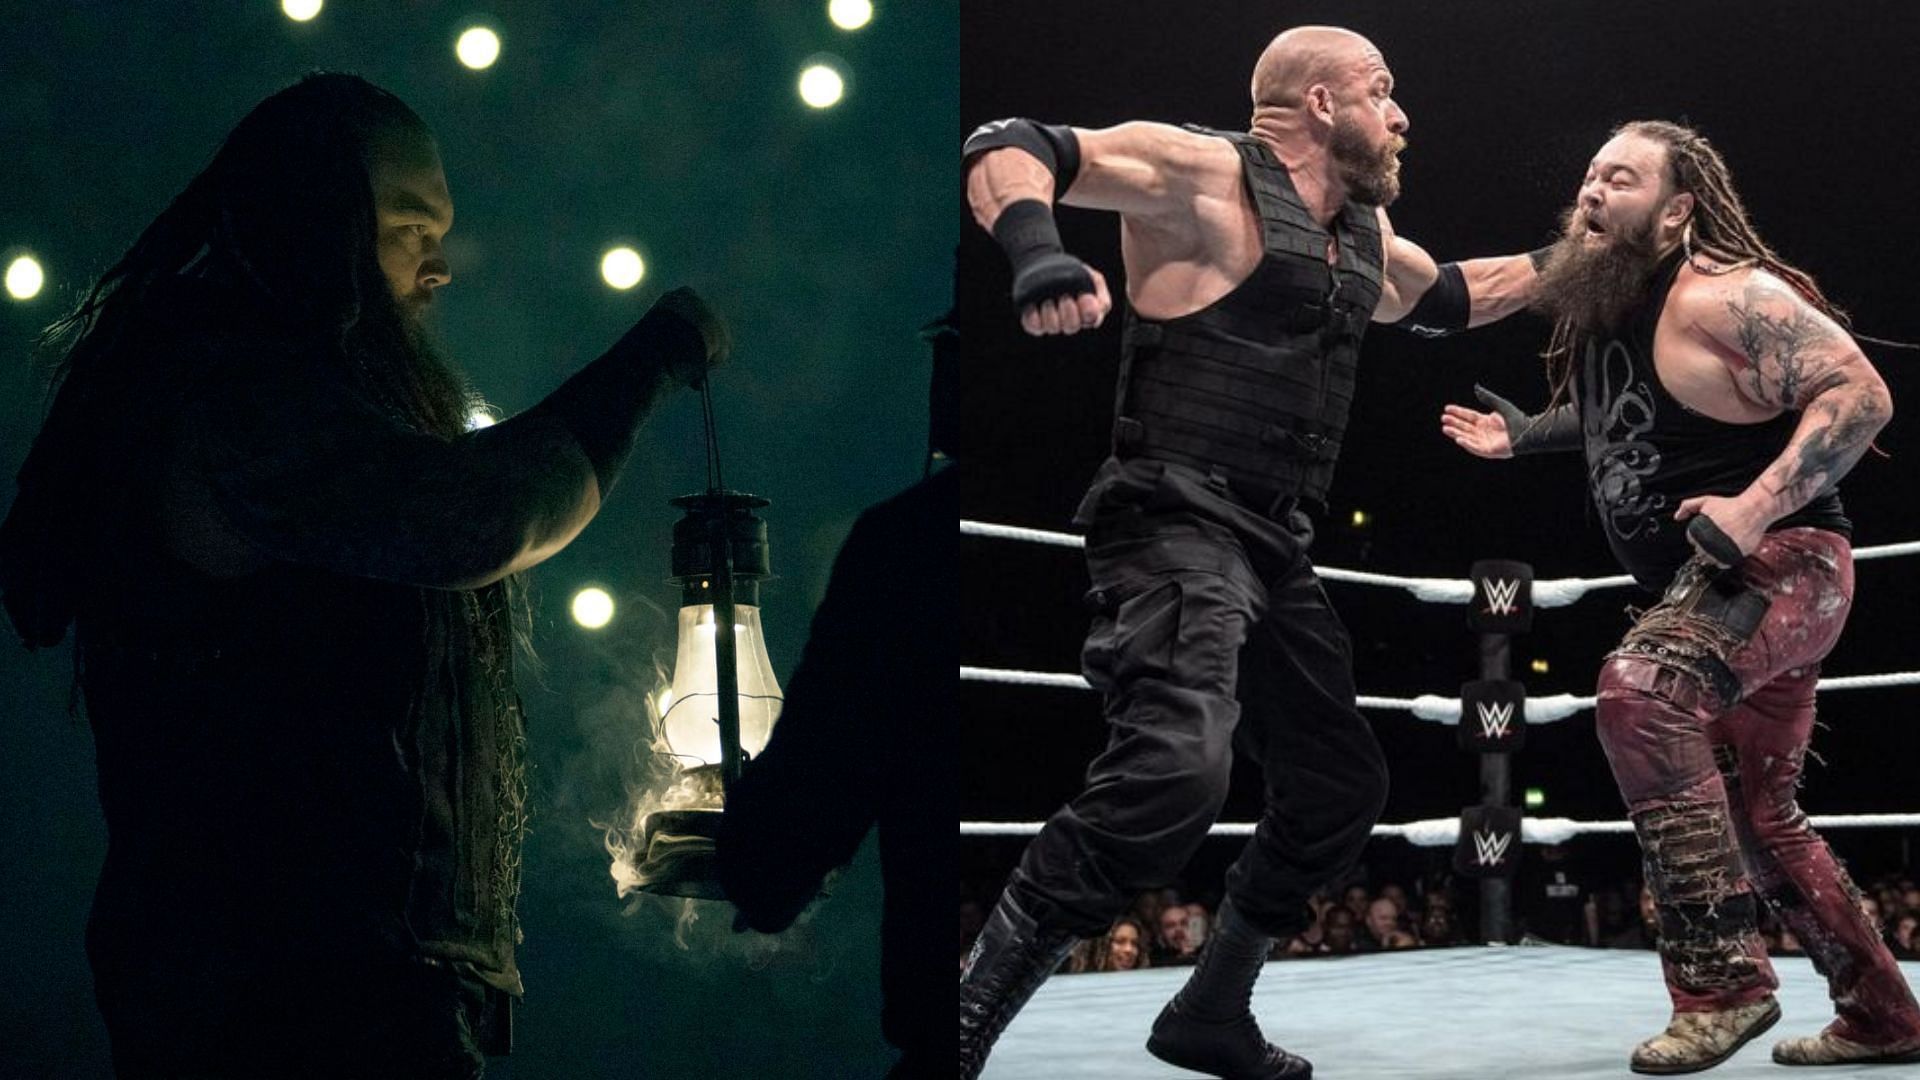 Bray Wyatt made his return at Extreme Rules 2022